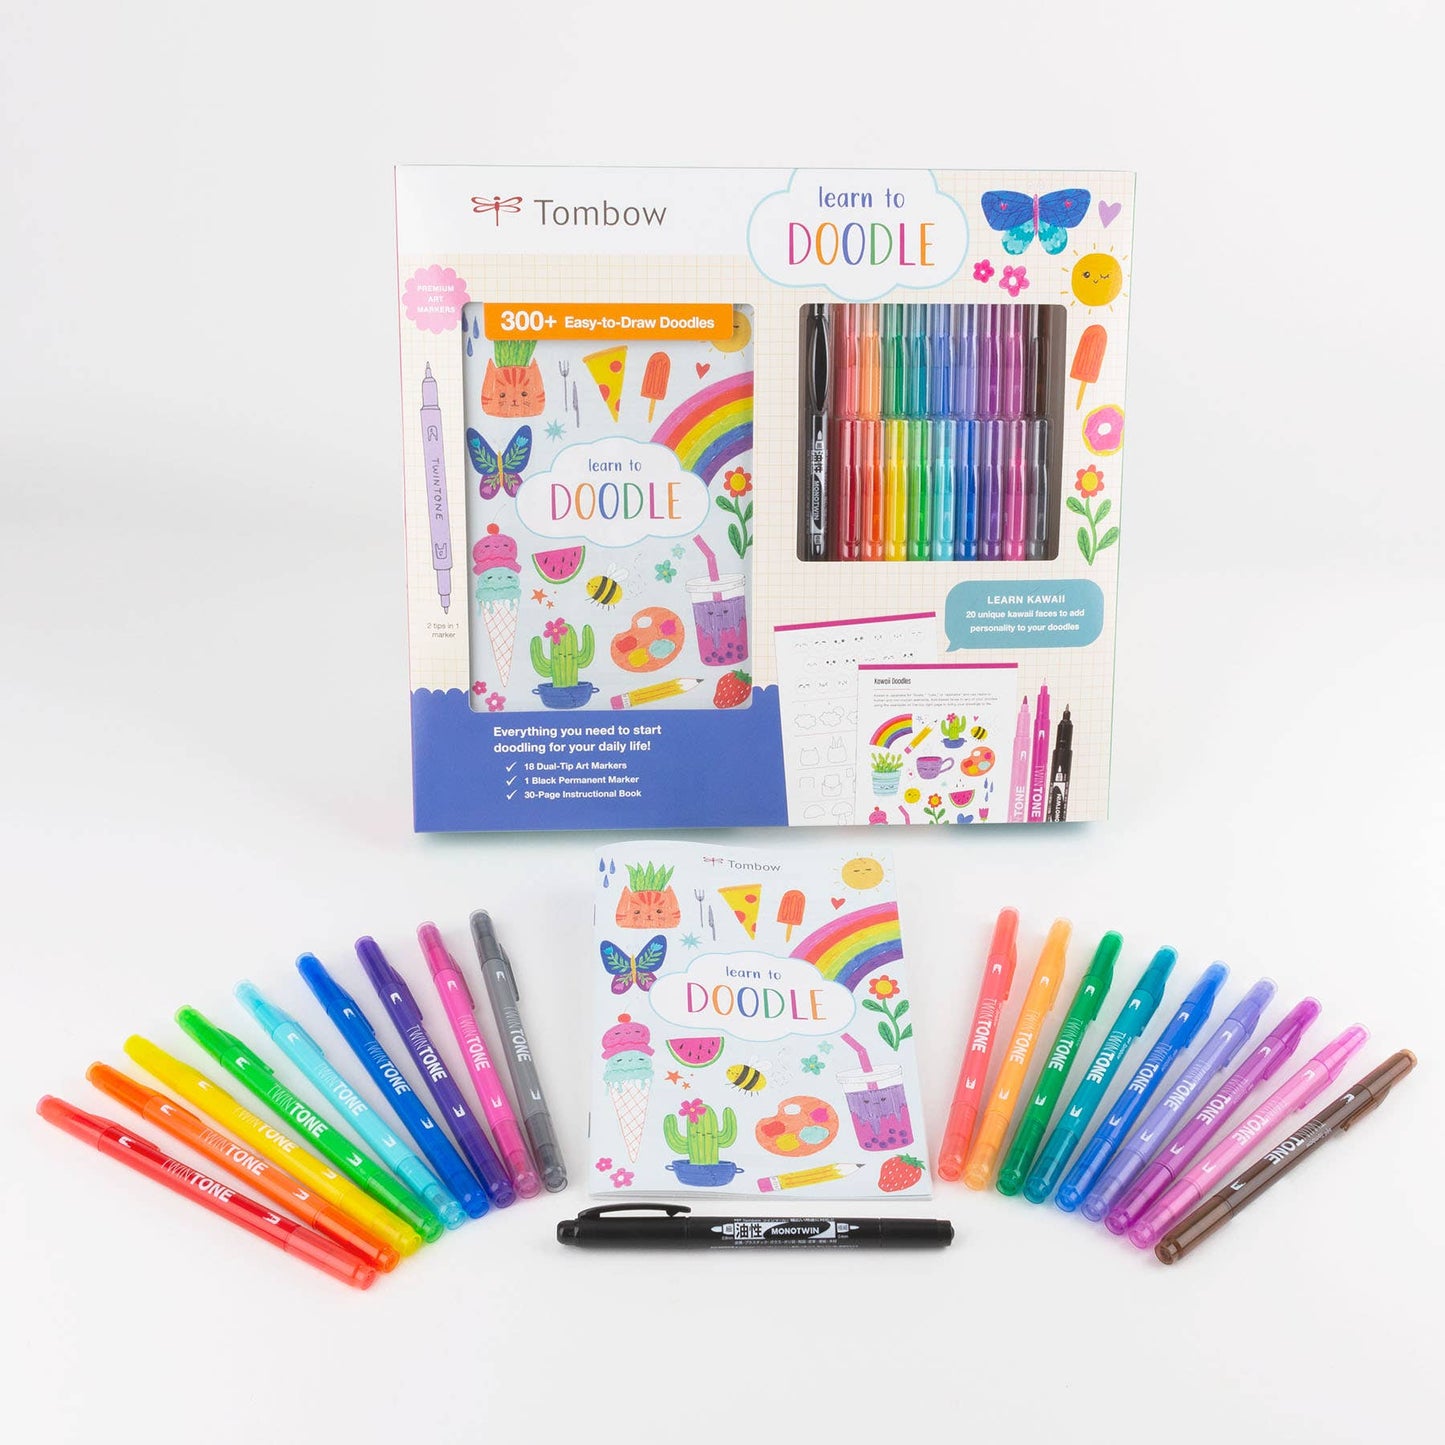 Tombow "Learn to Doodle Kit"